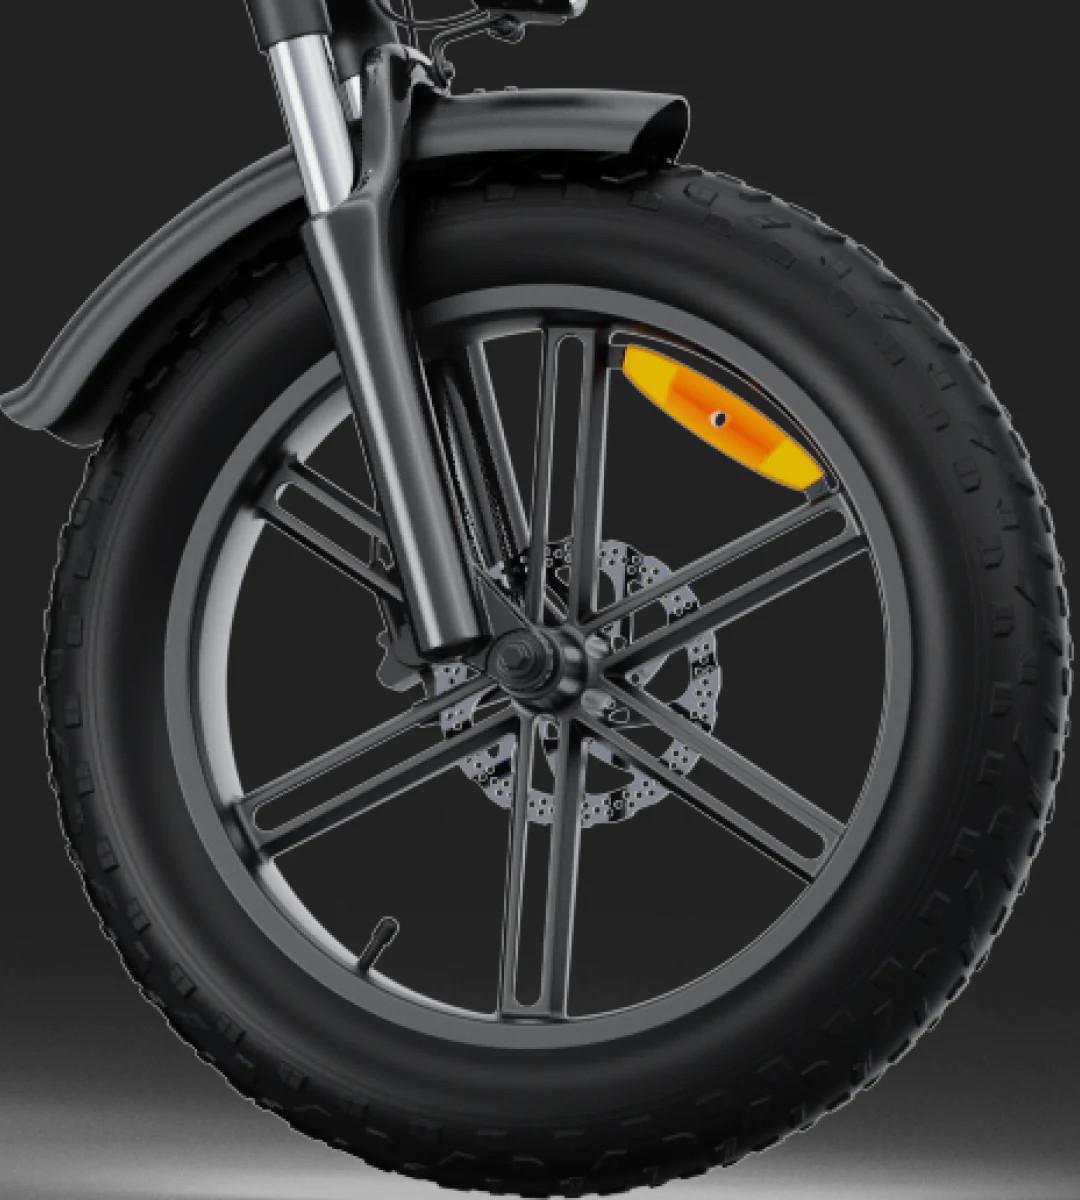 FUELL Folld-1 - 20” fat tires and front&rear suspension